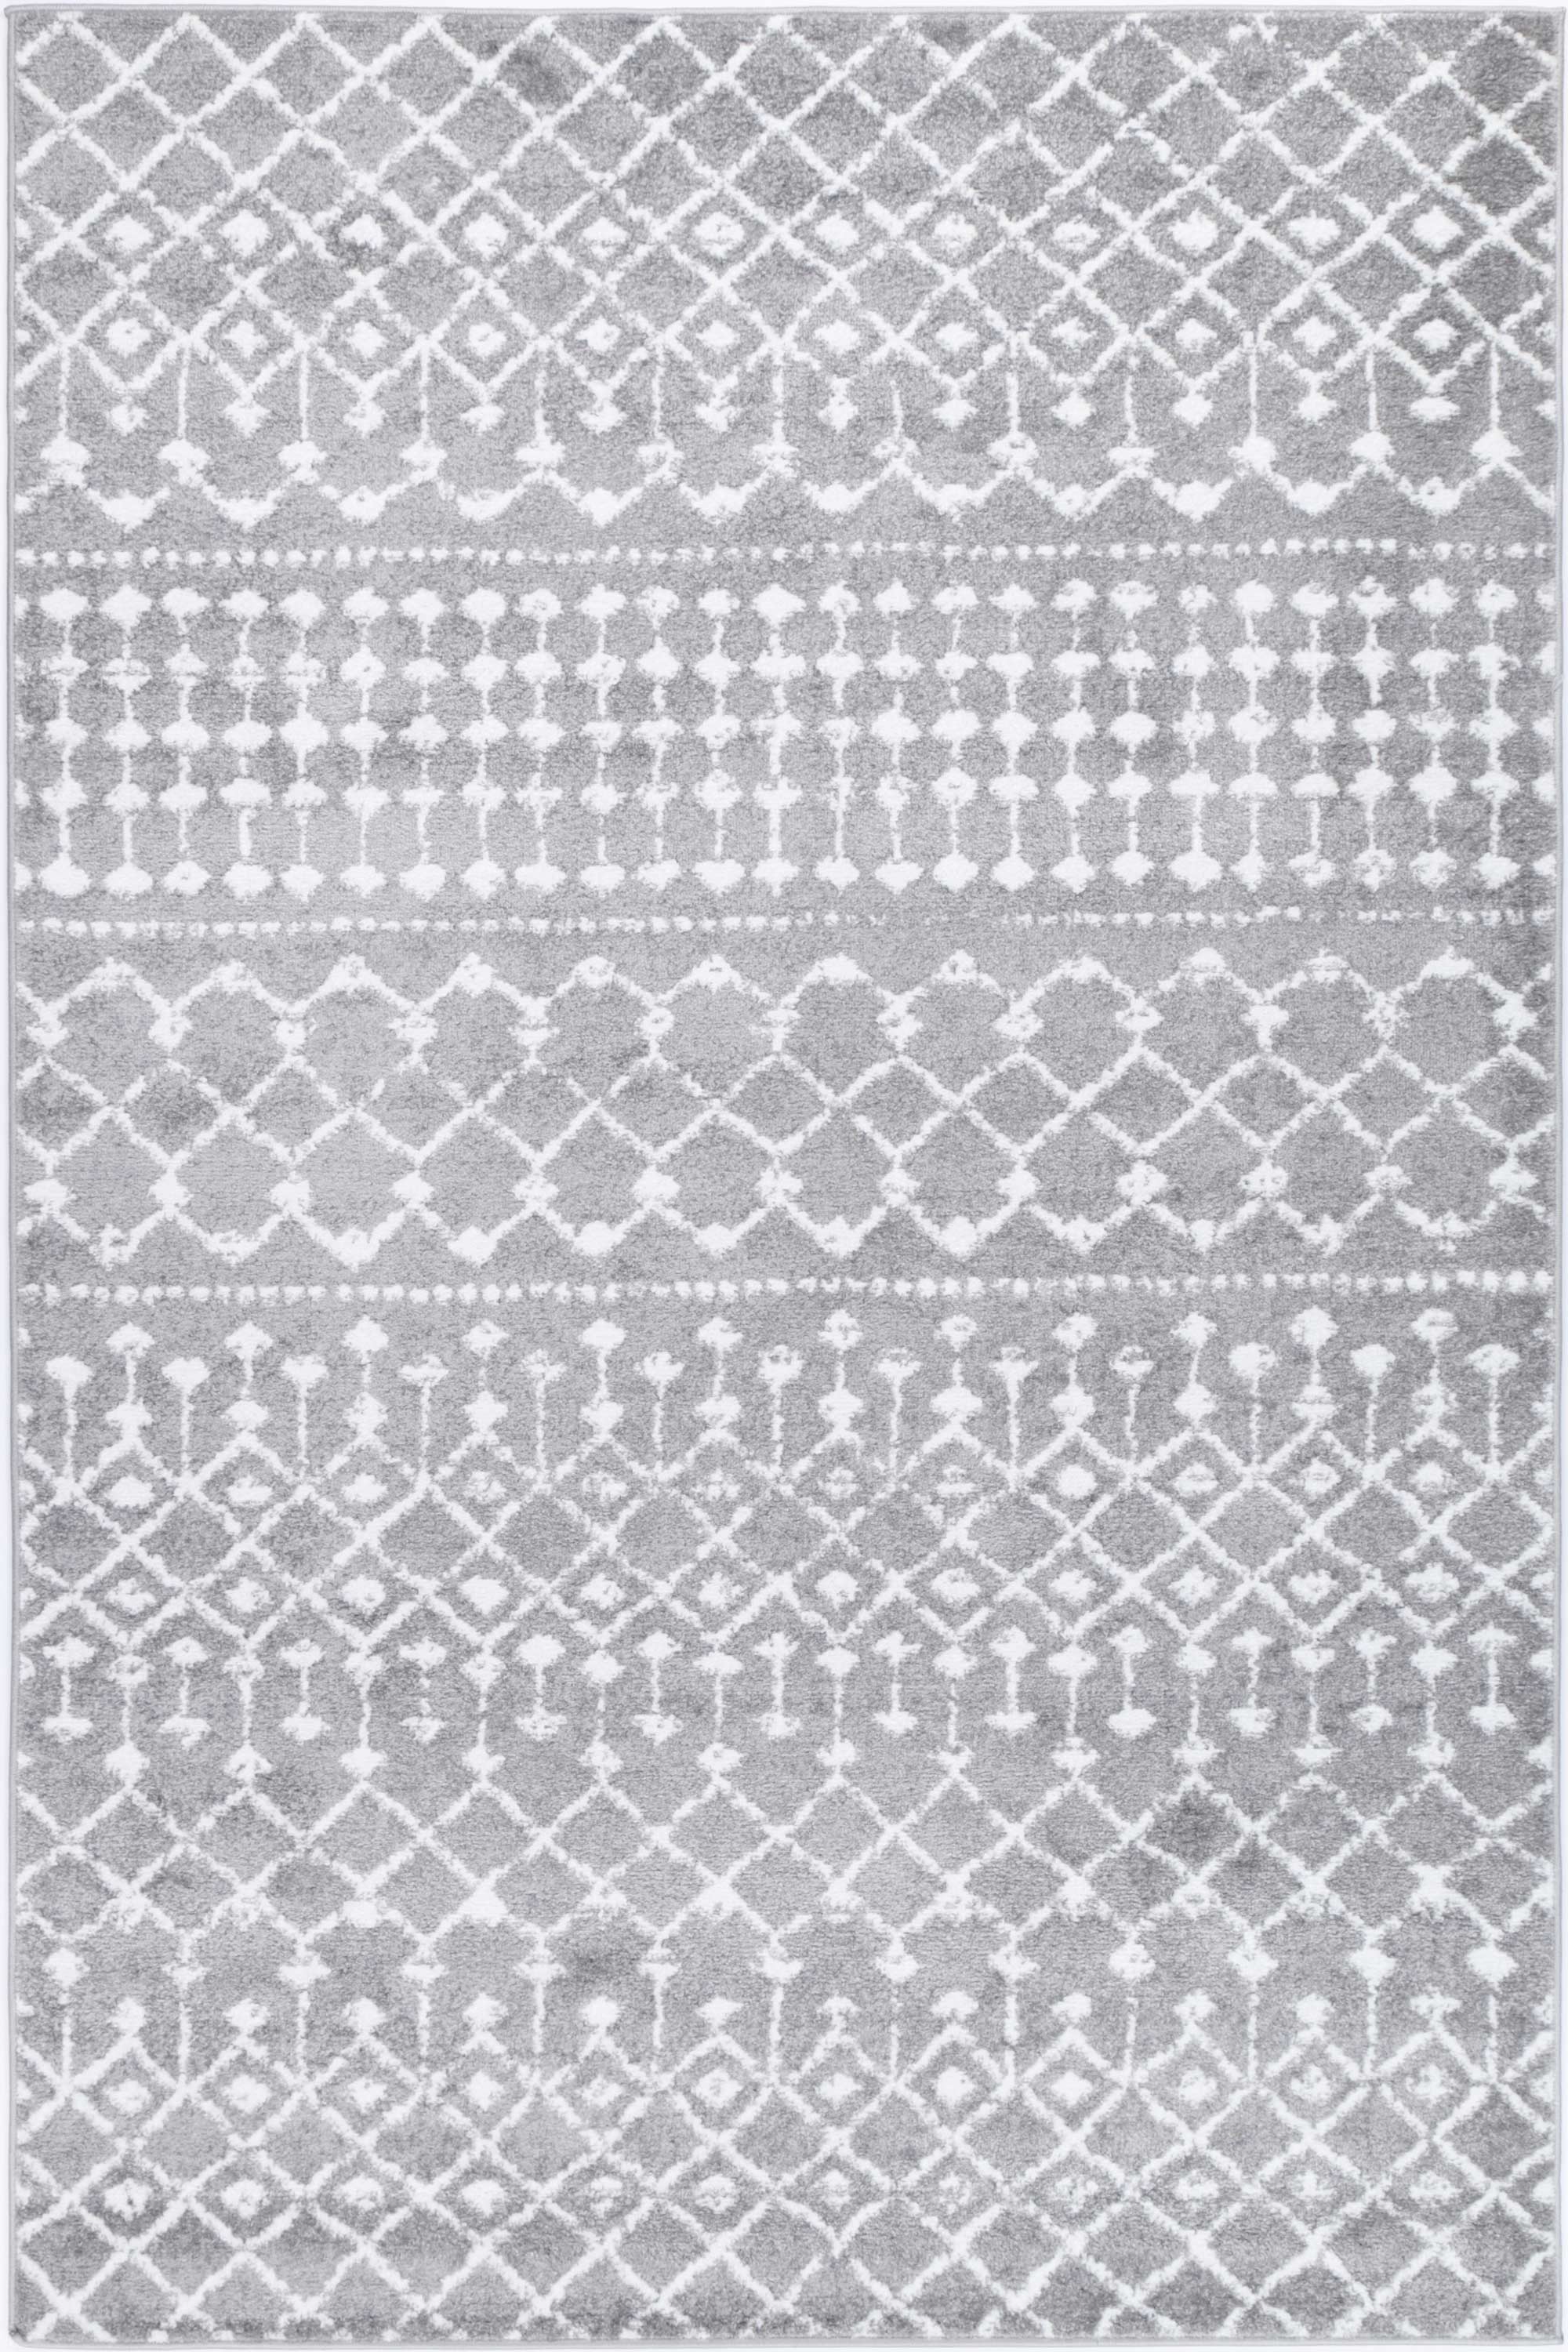 Bergen Repeats Grey and White Rug